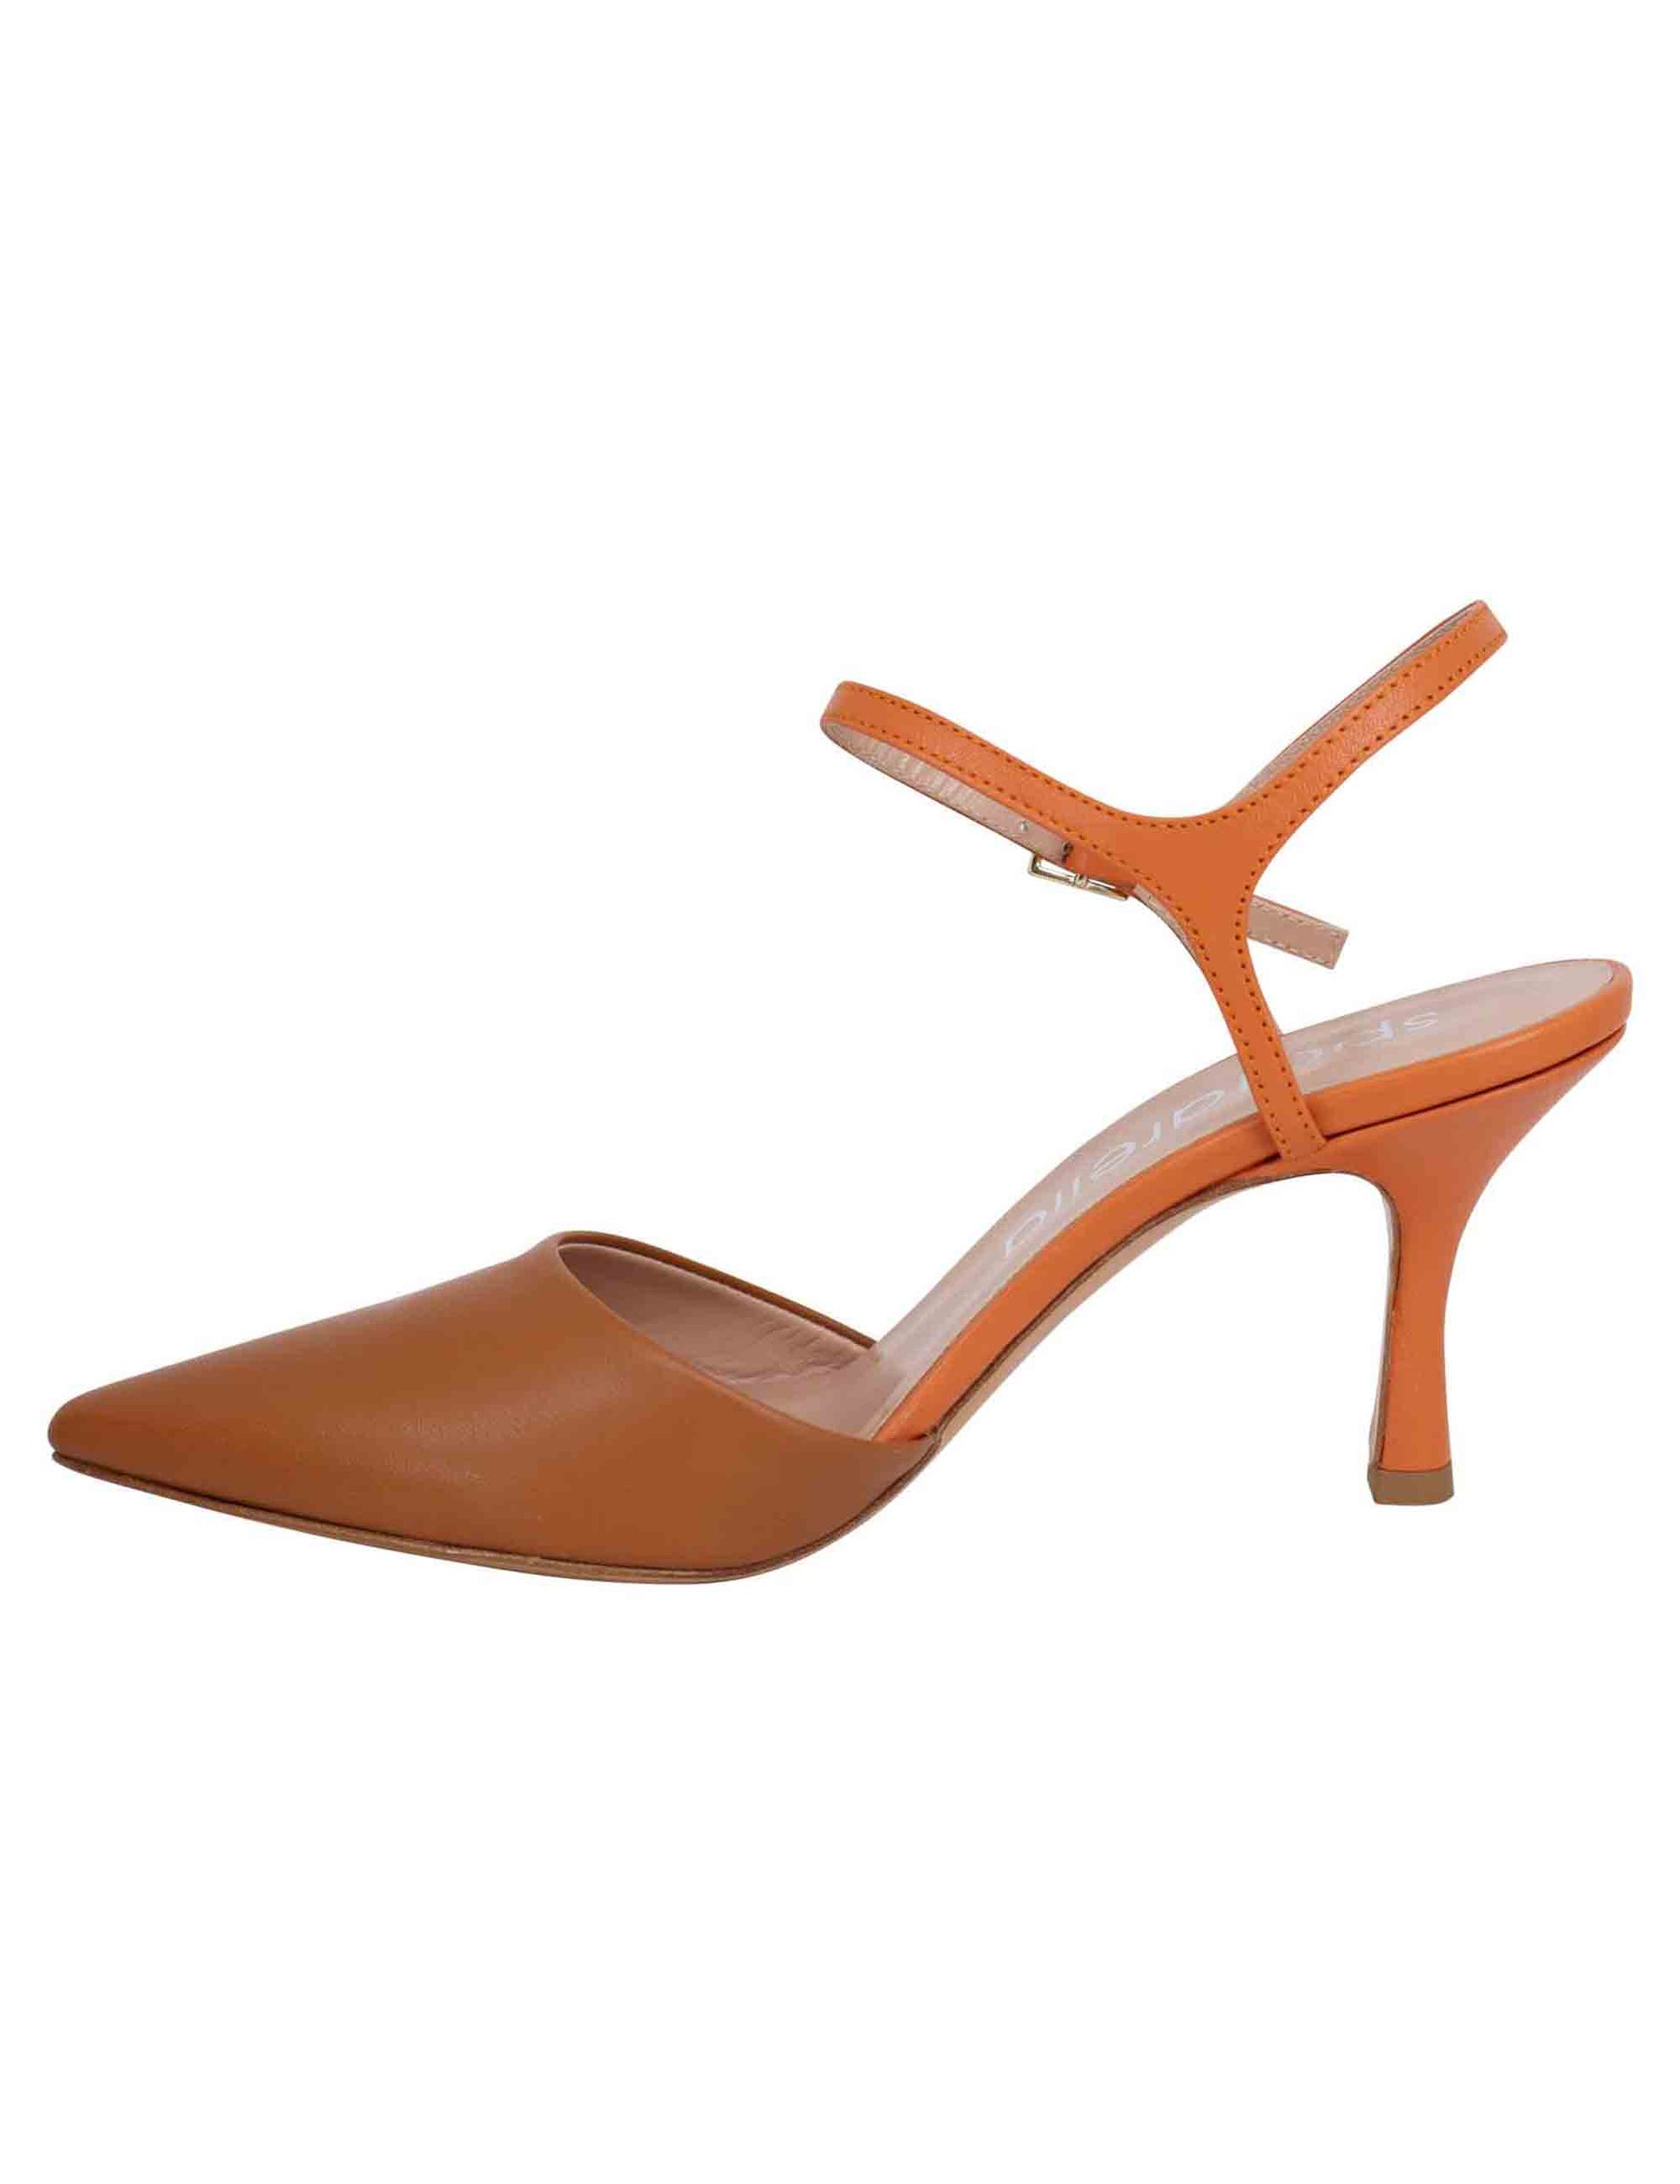 Women's sandals in tan leather with high heel and ankle strap